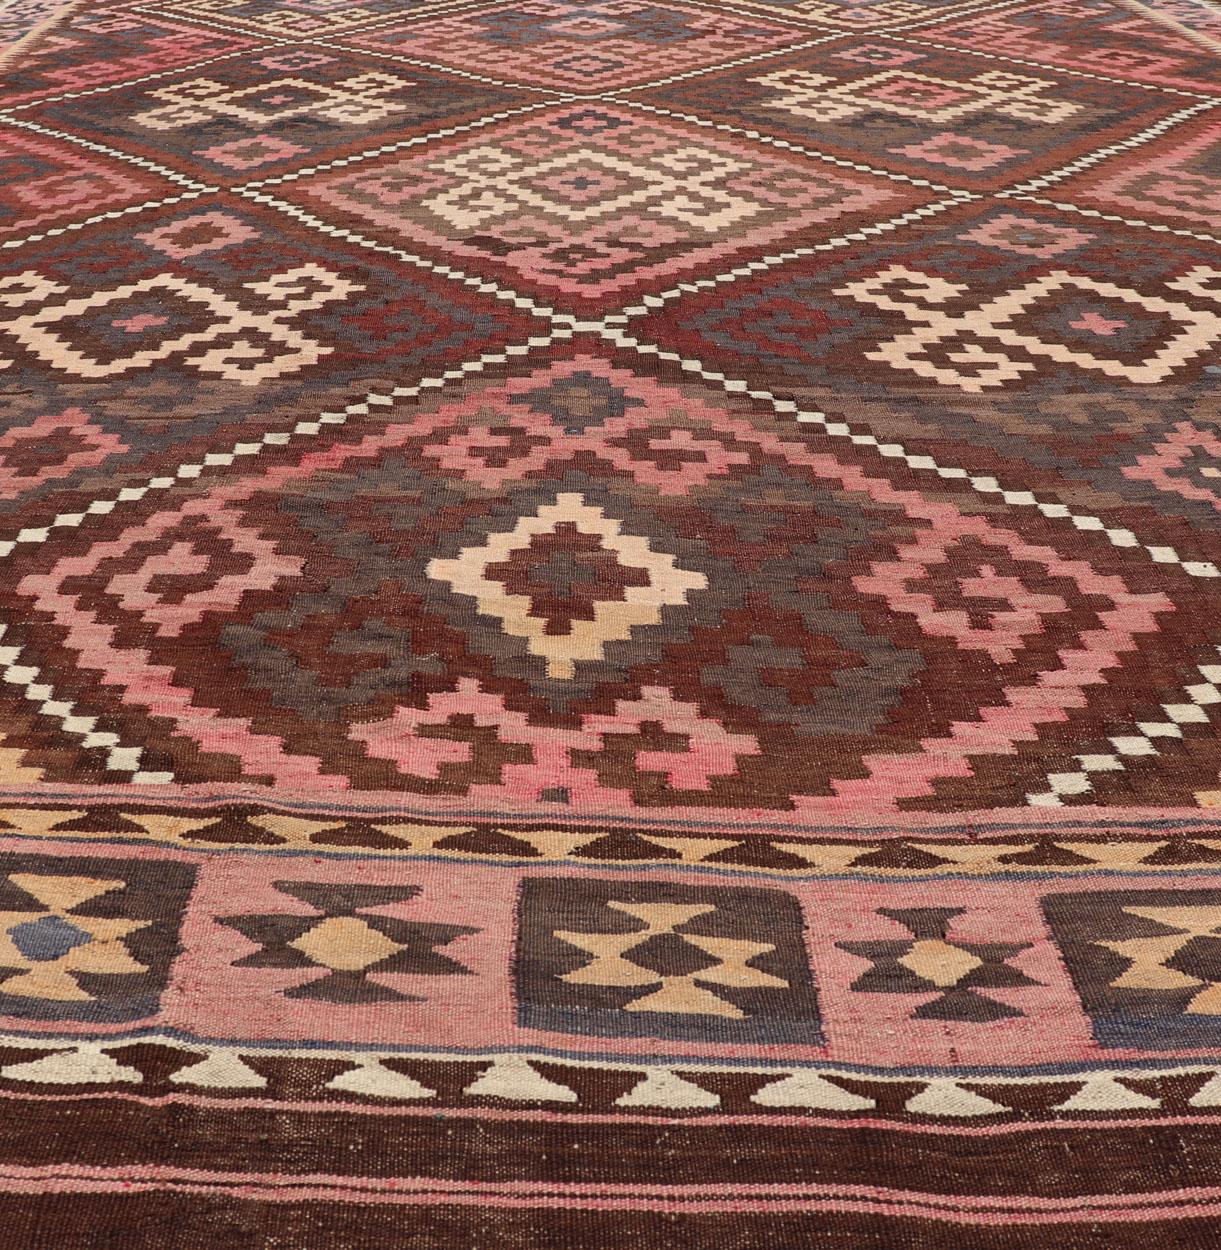 All-Over Hand Woven Geometric Kilim Diamond Design in Brown, Pink, and Ivory In Good Condition For Sale In Atlanta, GA